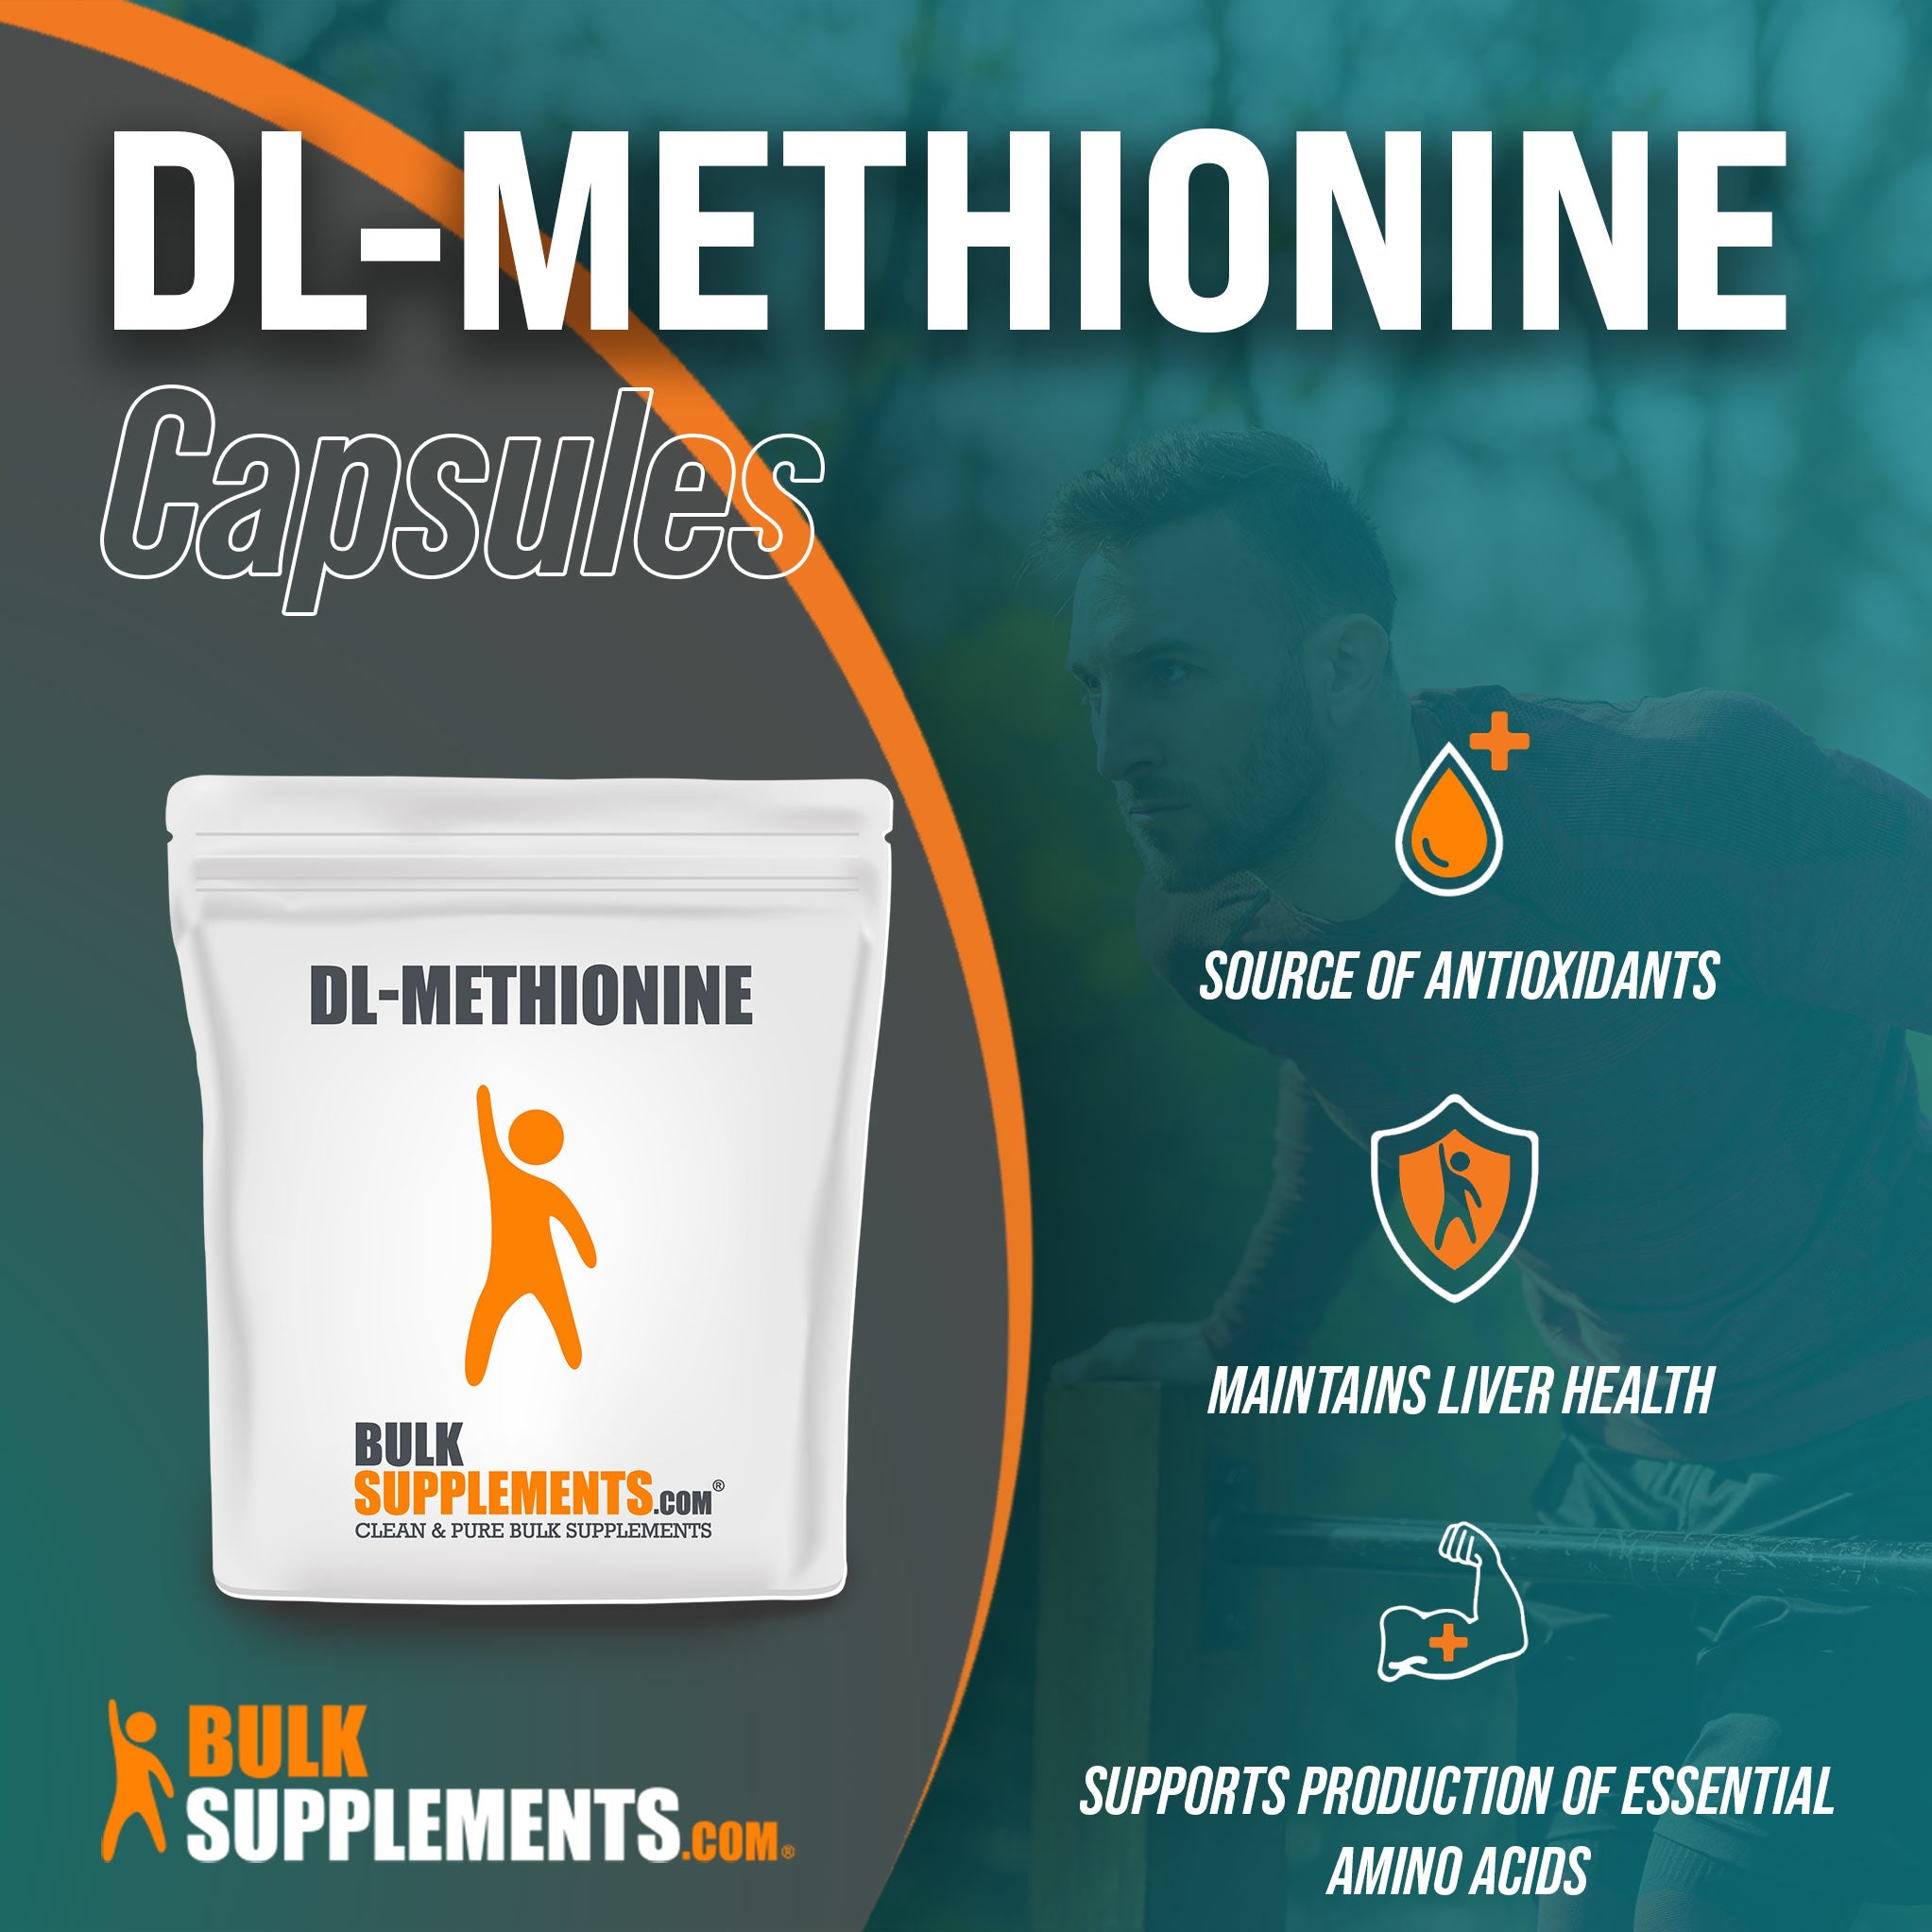 Benefits of DL-Methionine; source of antioxidants, maintains liver health, supports production of essential amino acids